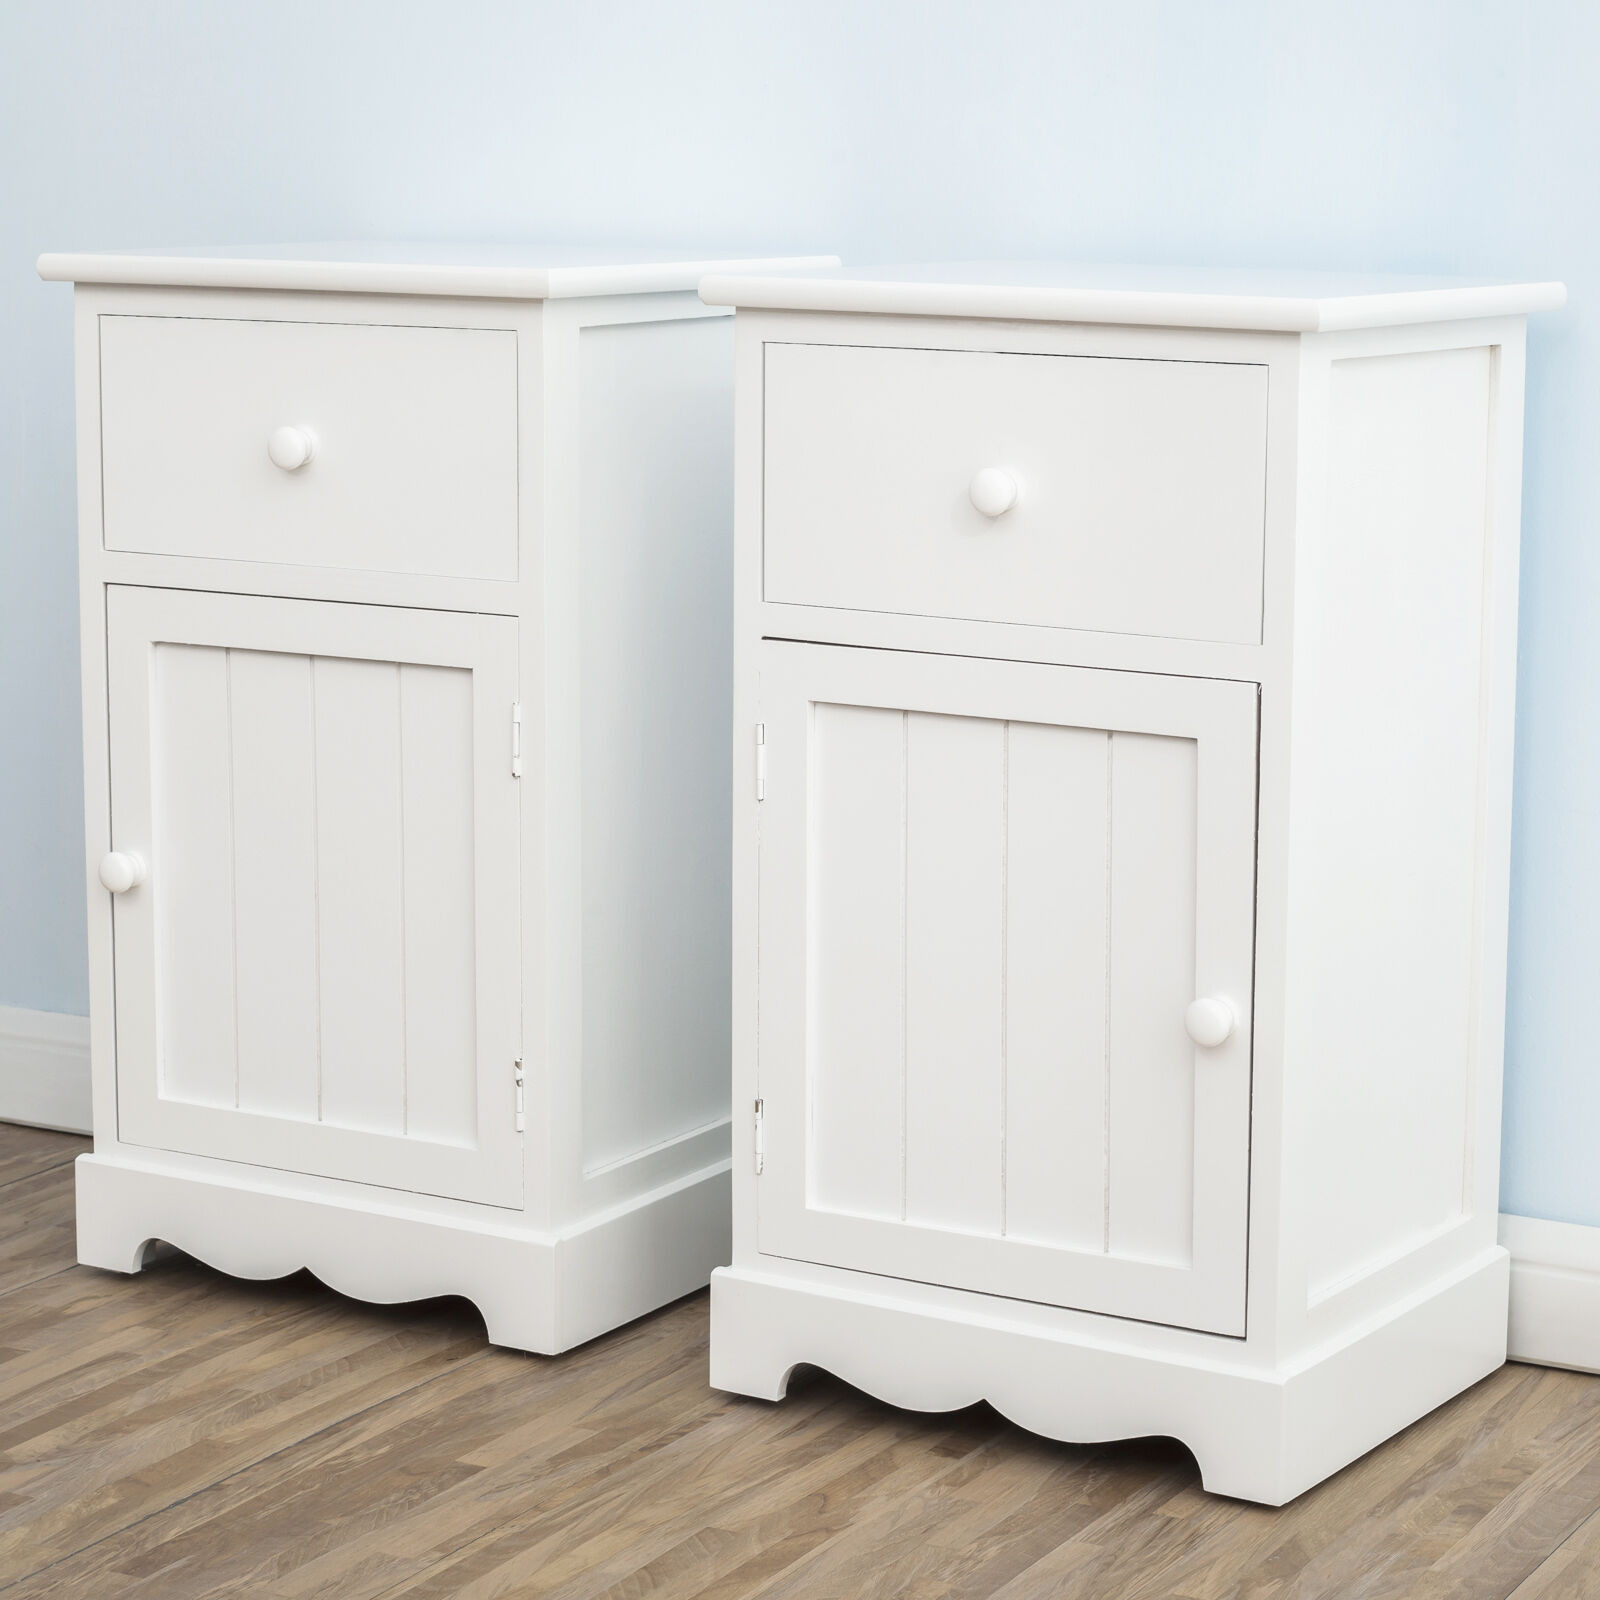 Bedroom Storage Cabinets
 Pair of White Groove Door Bedside Tables Drawers Storage